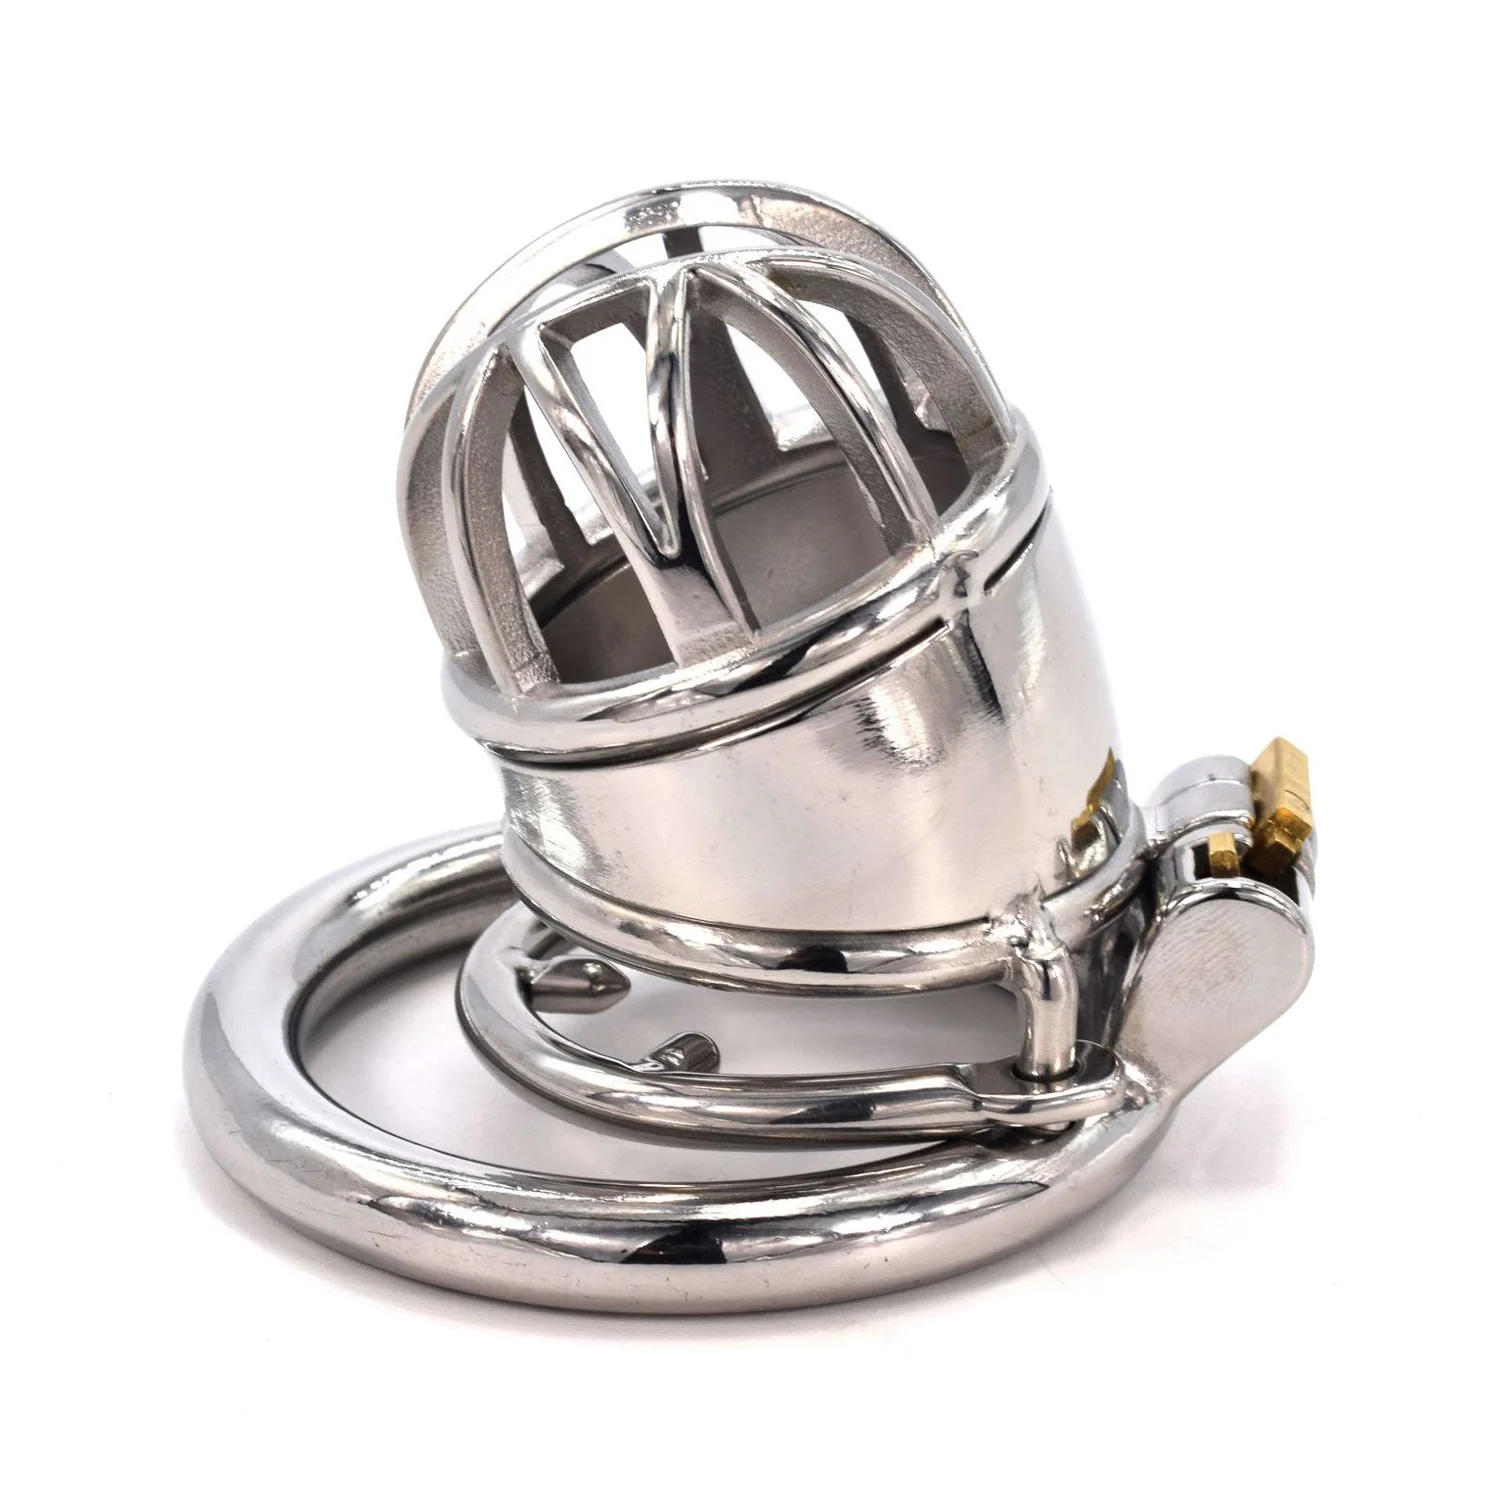 

2021 Stainless Steel Male Chastity Device Cock Cage Metal Bondage Belt Lock Penis Rings Fetish Lockable Sex Toys for Men BDSM